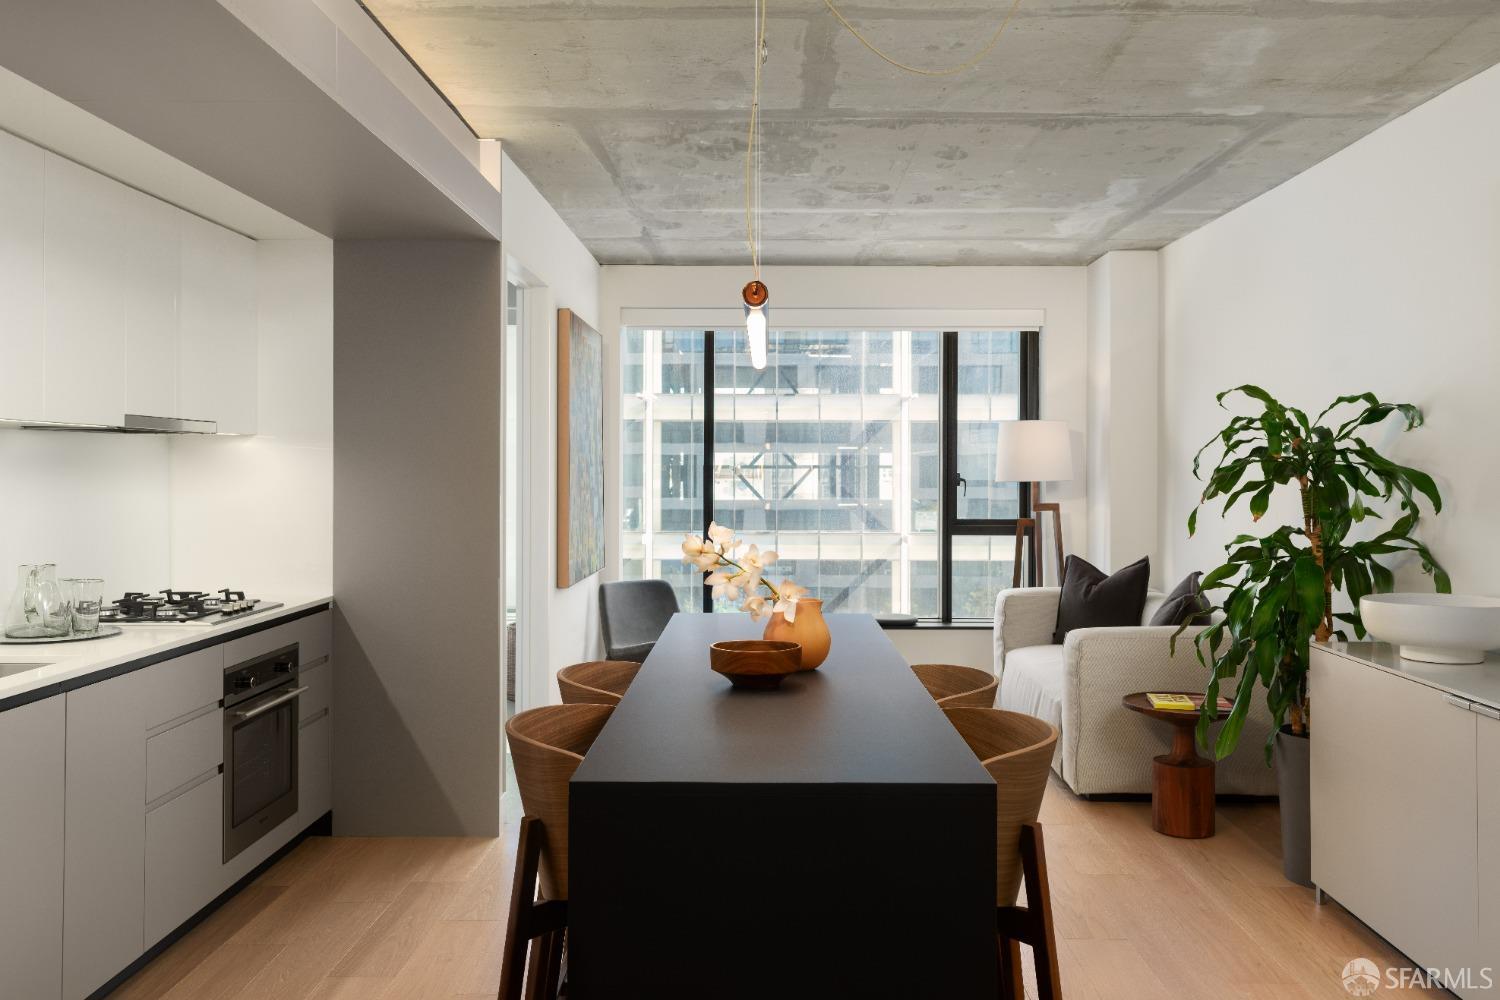 Photo of 960 Market St #201 in San Francisco, CA